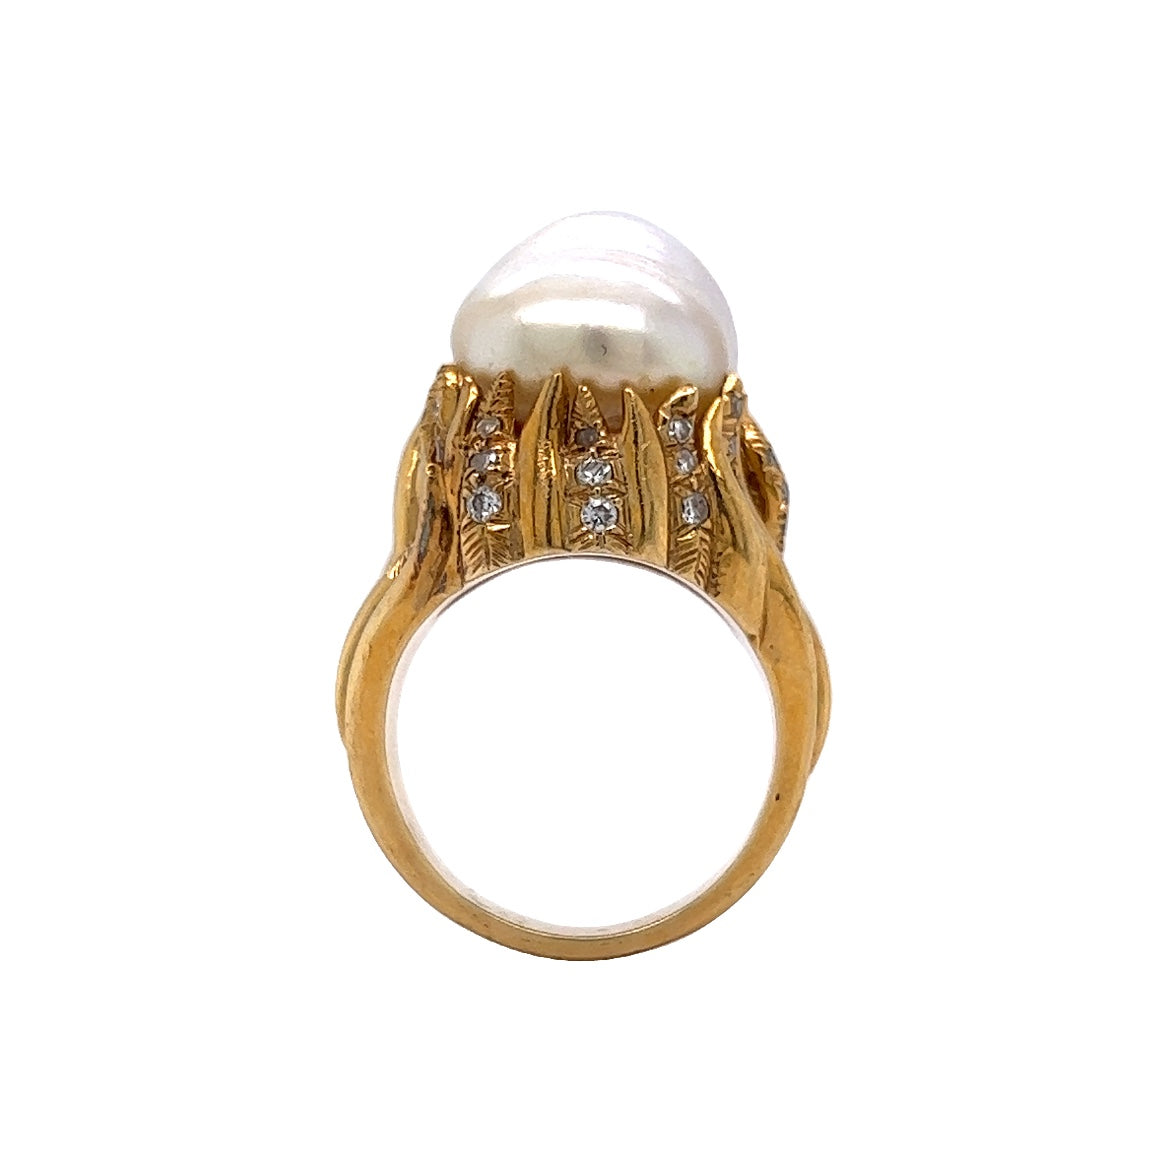 Vintage Mid-Century Pearl & Diamond Cocktail Ring in 18k Yellow Gold